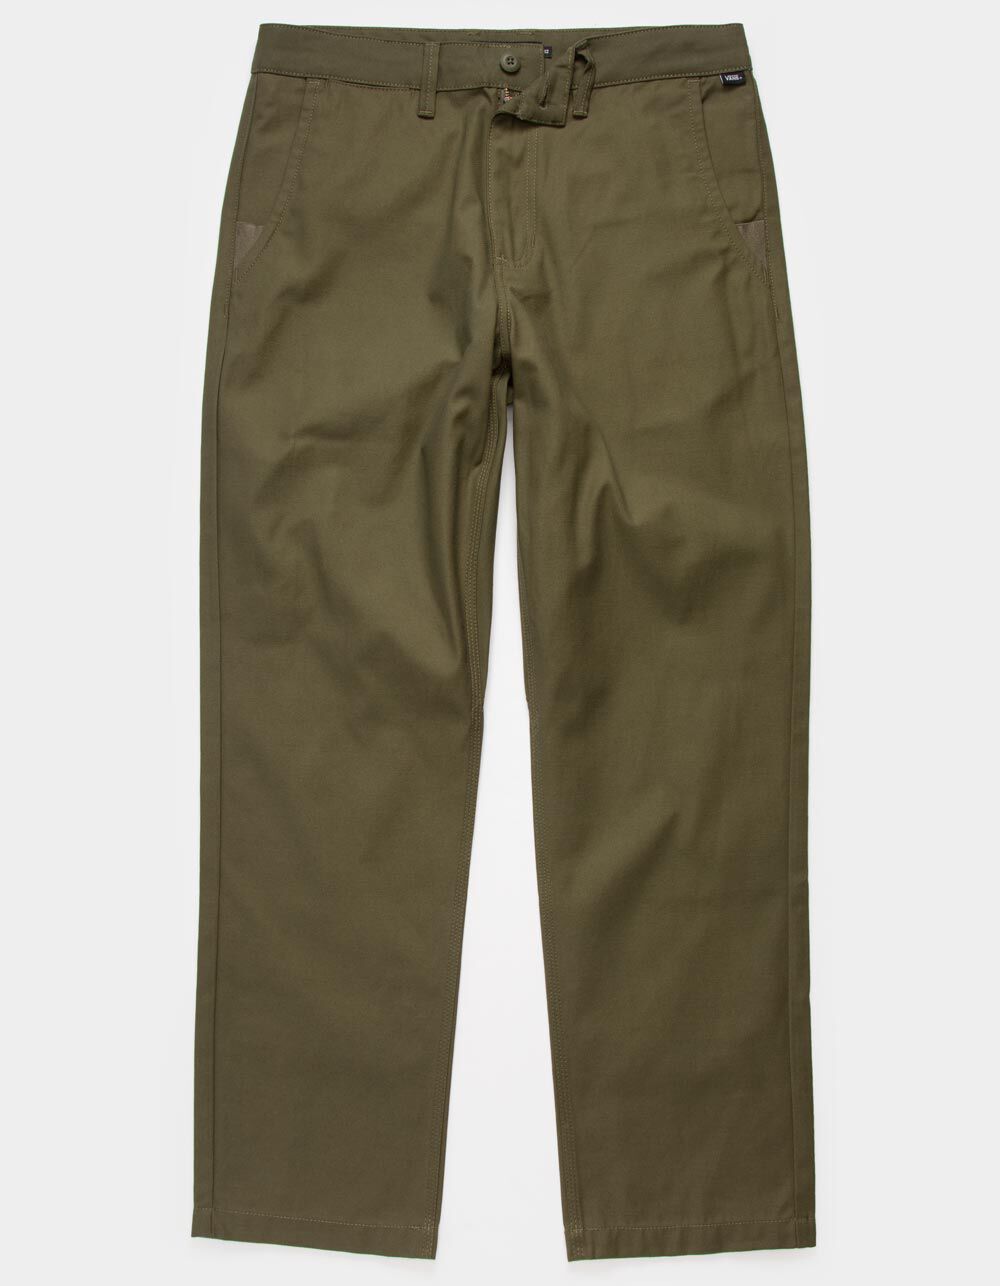 VANS Authentic Chino Glide Pro Mens Pants - MILITARY | Tillys